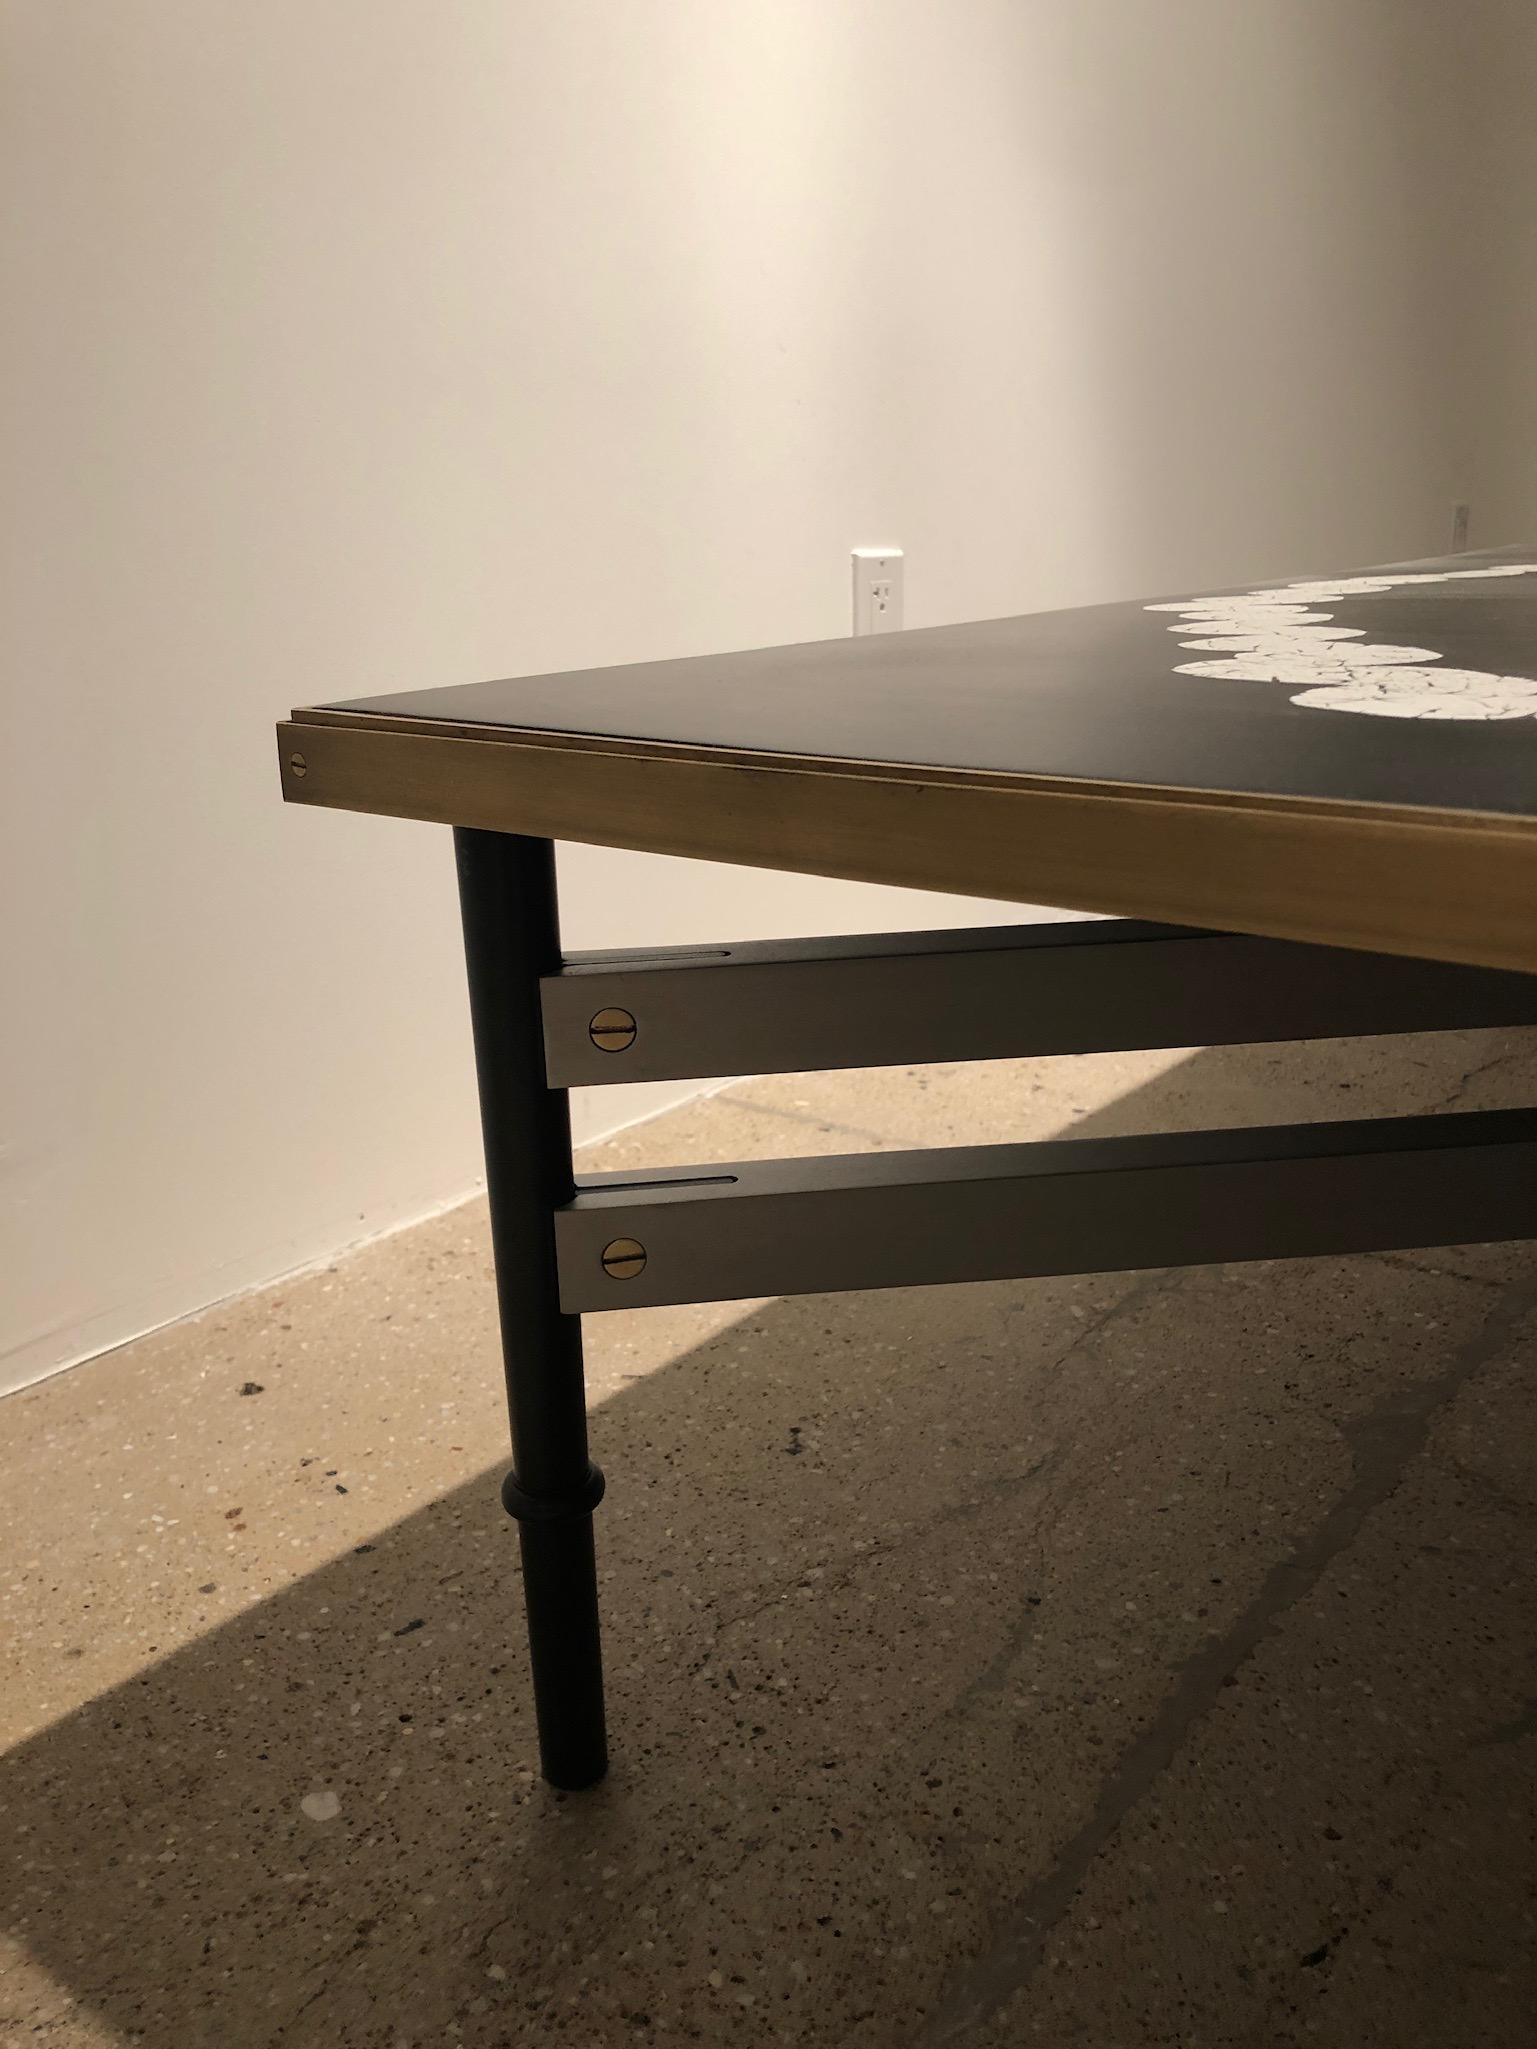 This coffee table features a hand-applied ring of cracked eggshell trapped in resin and lacquer, finished with a satin brass trim around the edges. The base is structured by a combination of blackened steel legs with satin aluminum stretchers.